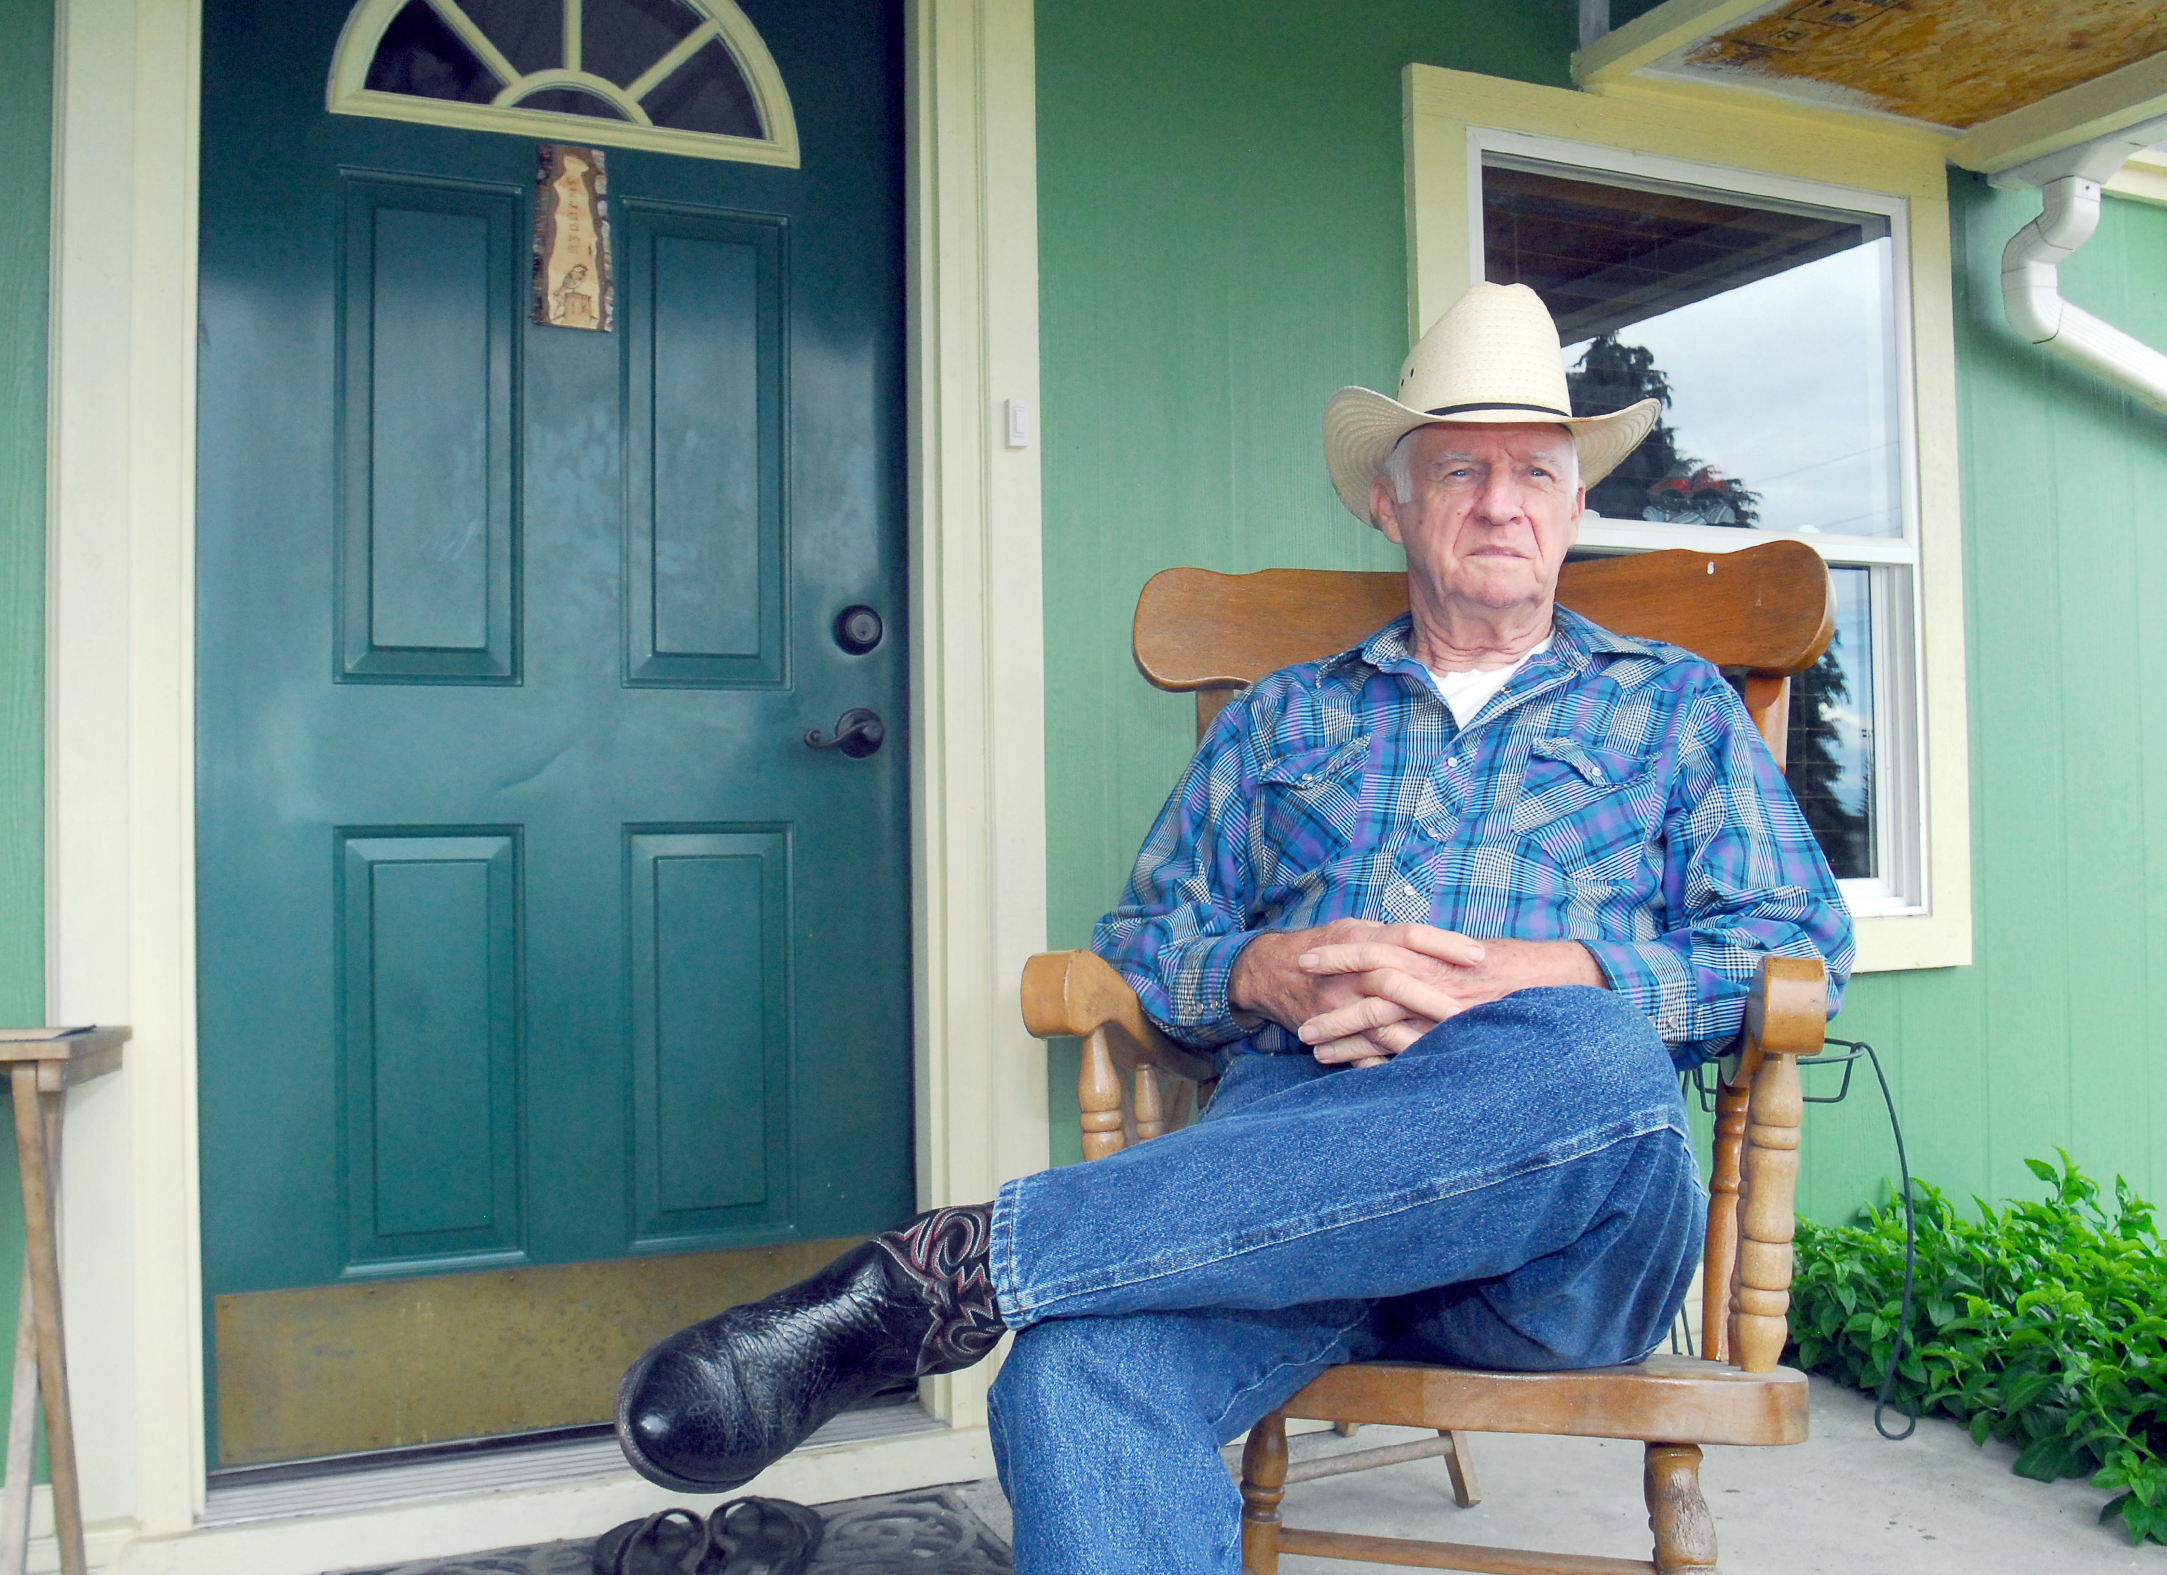 Charles W. Binney sits on the front porch of his Port Angeles home where he said he was assaulted by a man who tried to enter his house in April. — Keith Thorpe/Peninsula Daily News